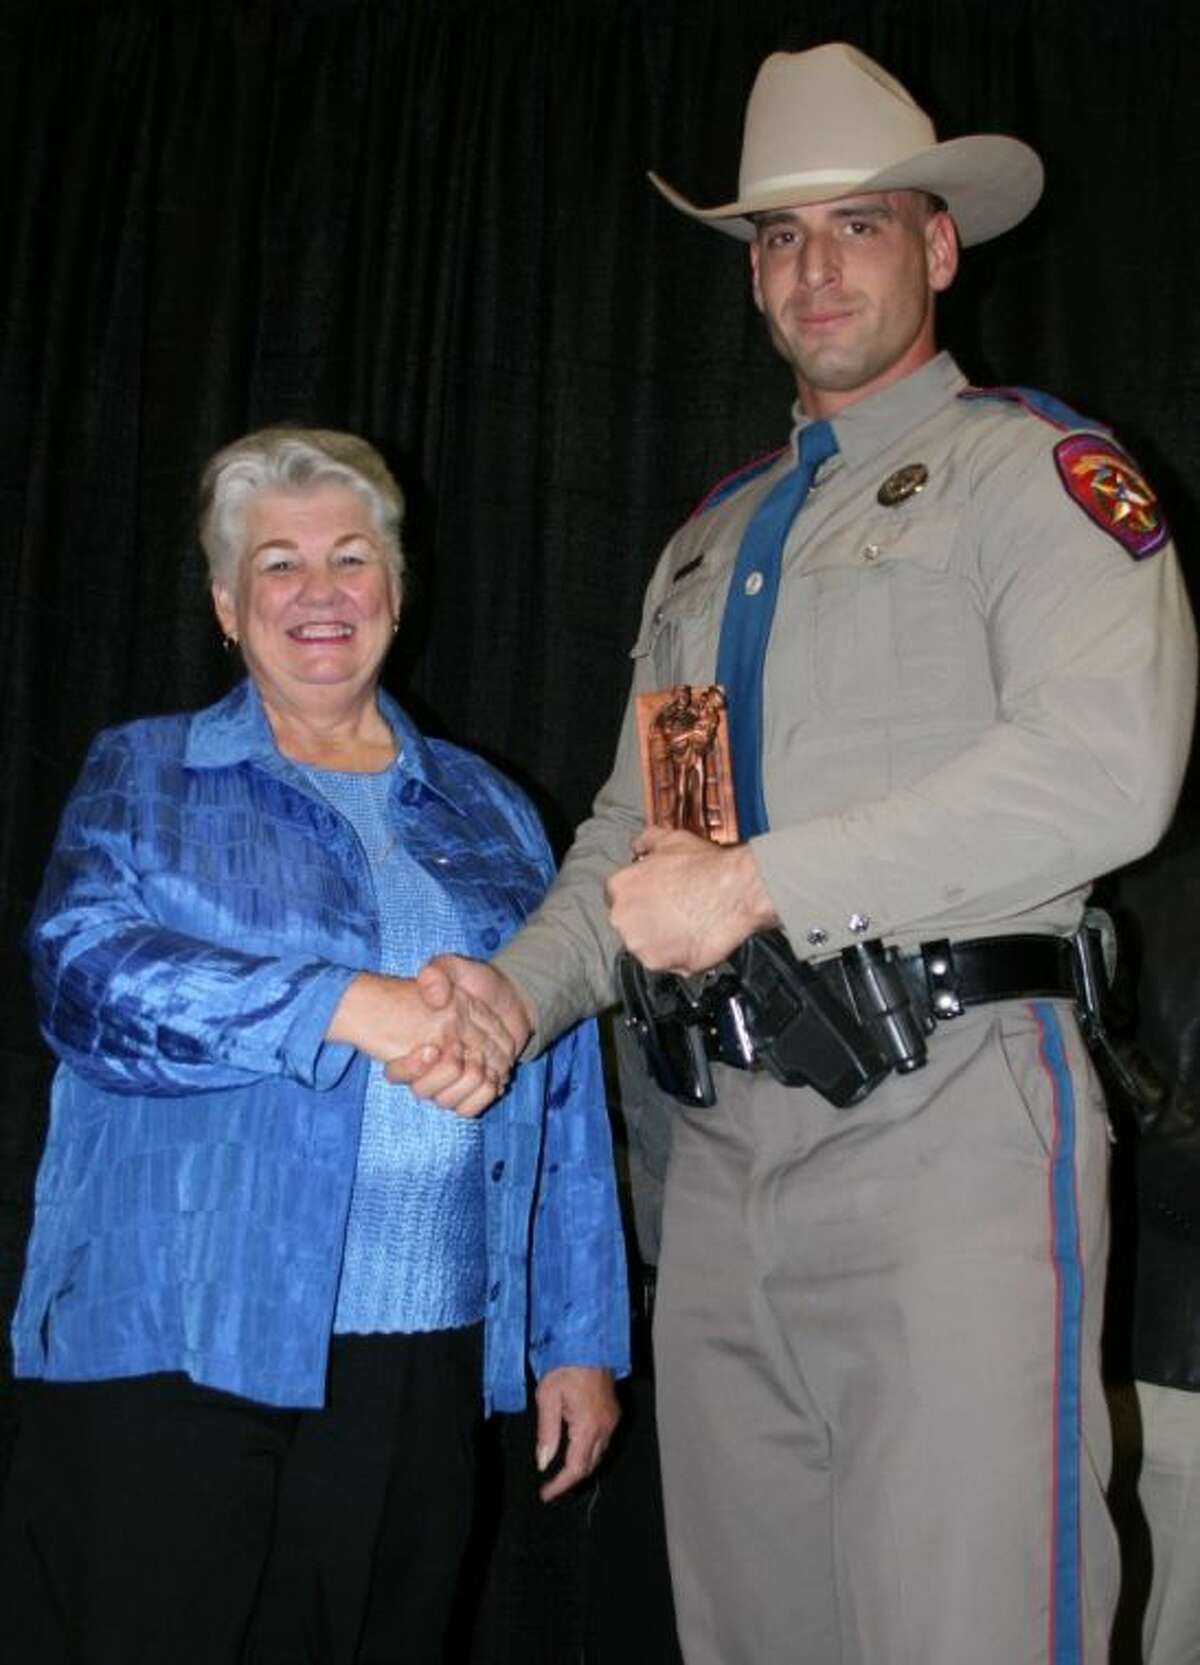 East Montgomery County Improvement District Chairman Connie Bloodworth presents DPS Trooper Derek Peterson with the Officer of the Year award for his department.